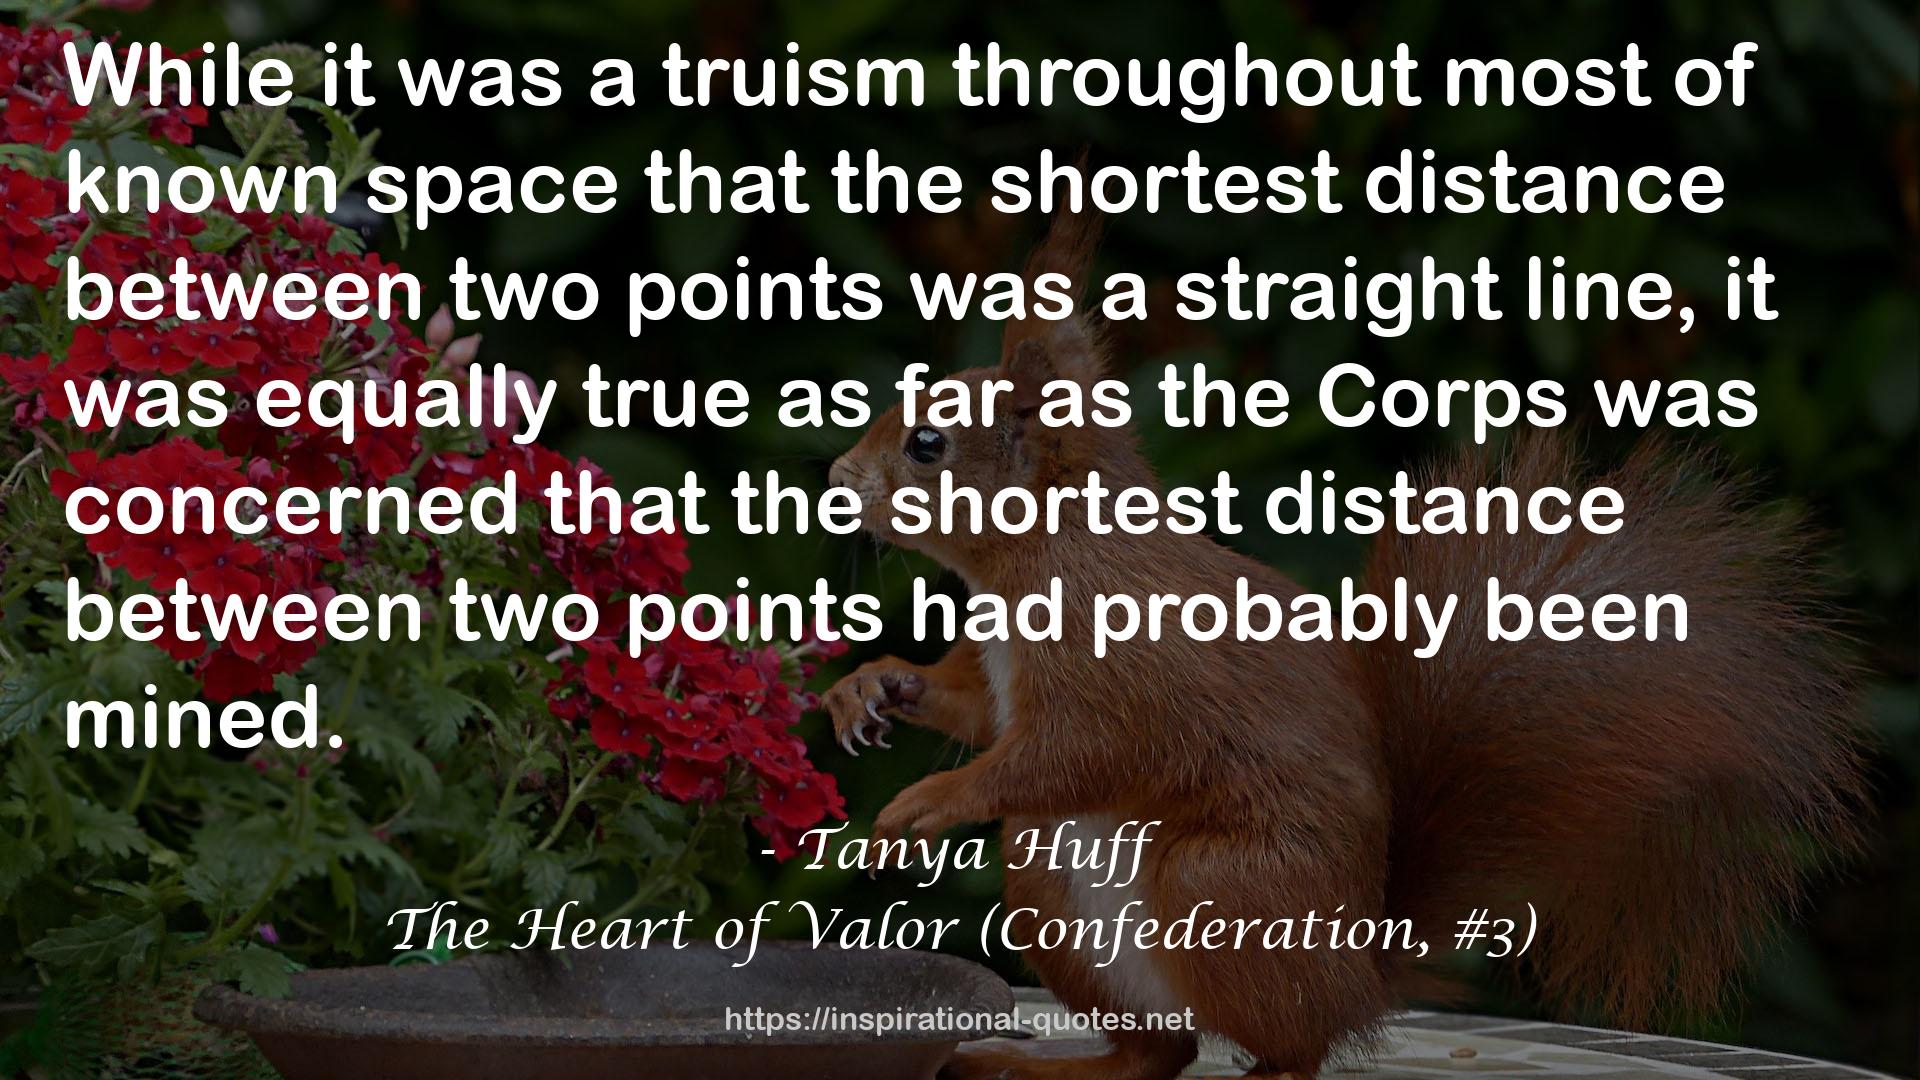 The Heart of Valor (Confederation, #3) QUOTES